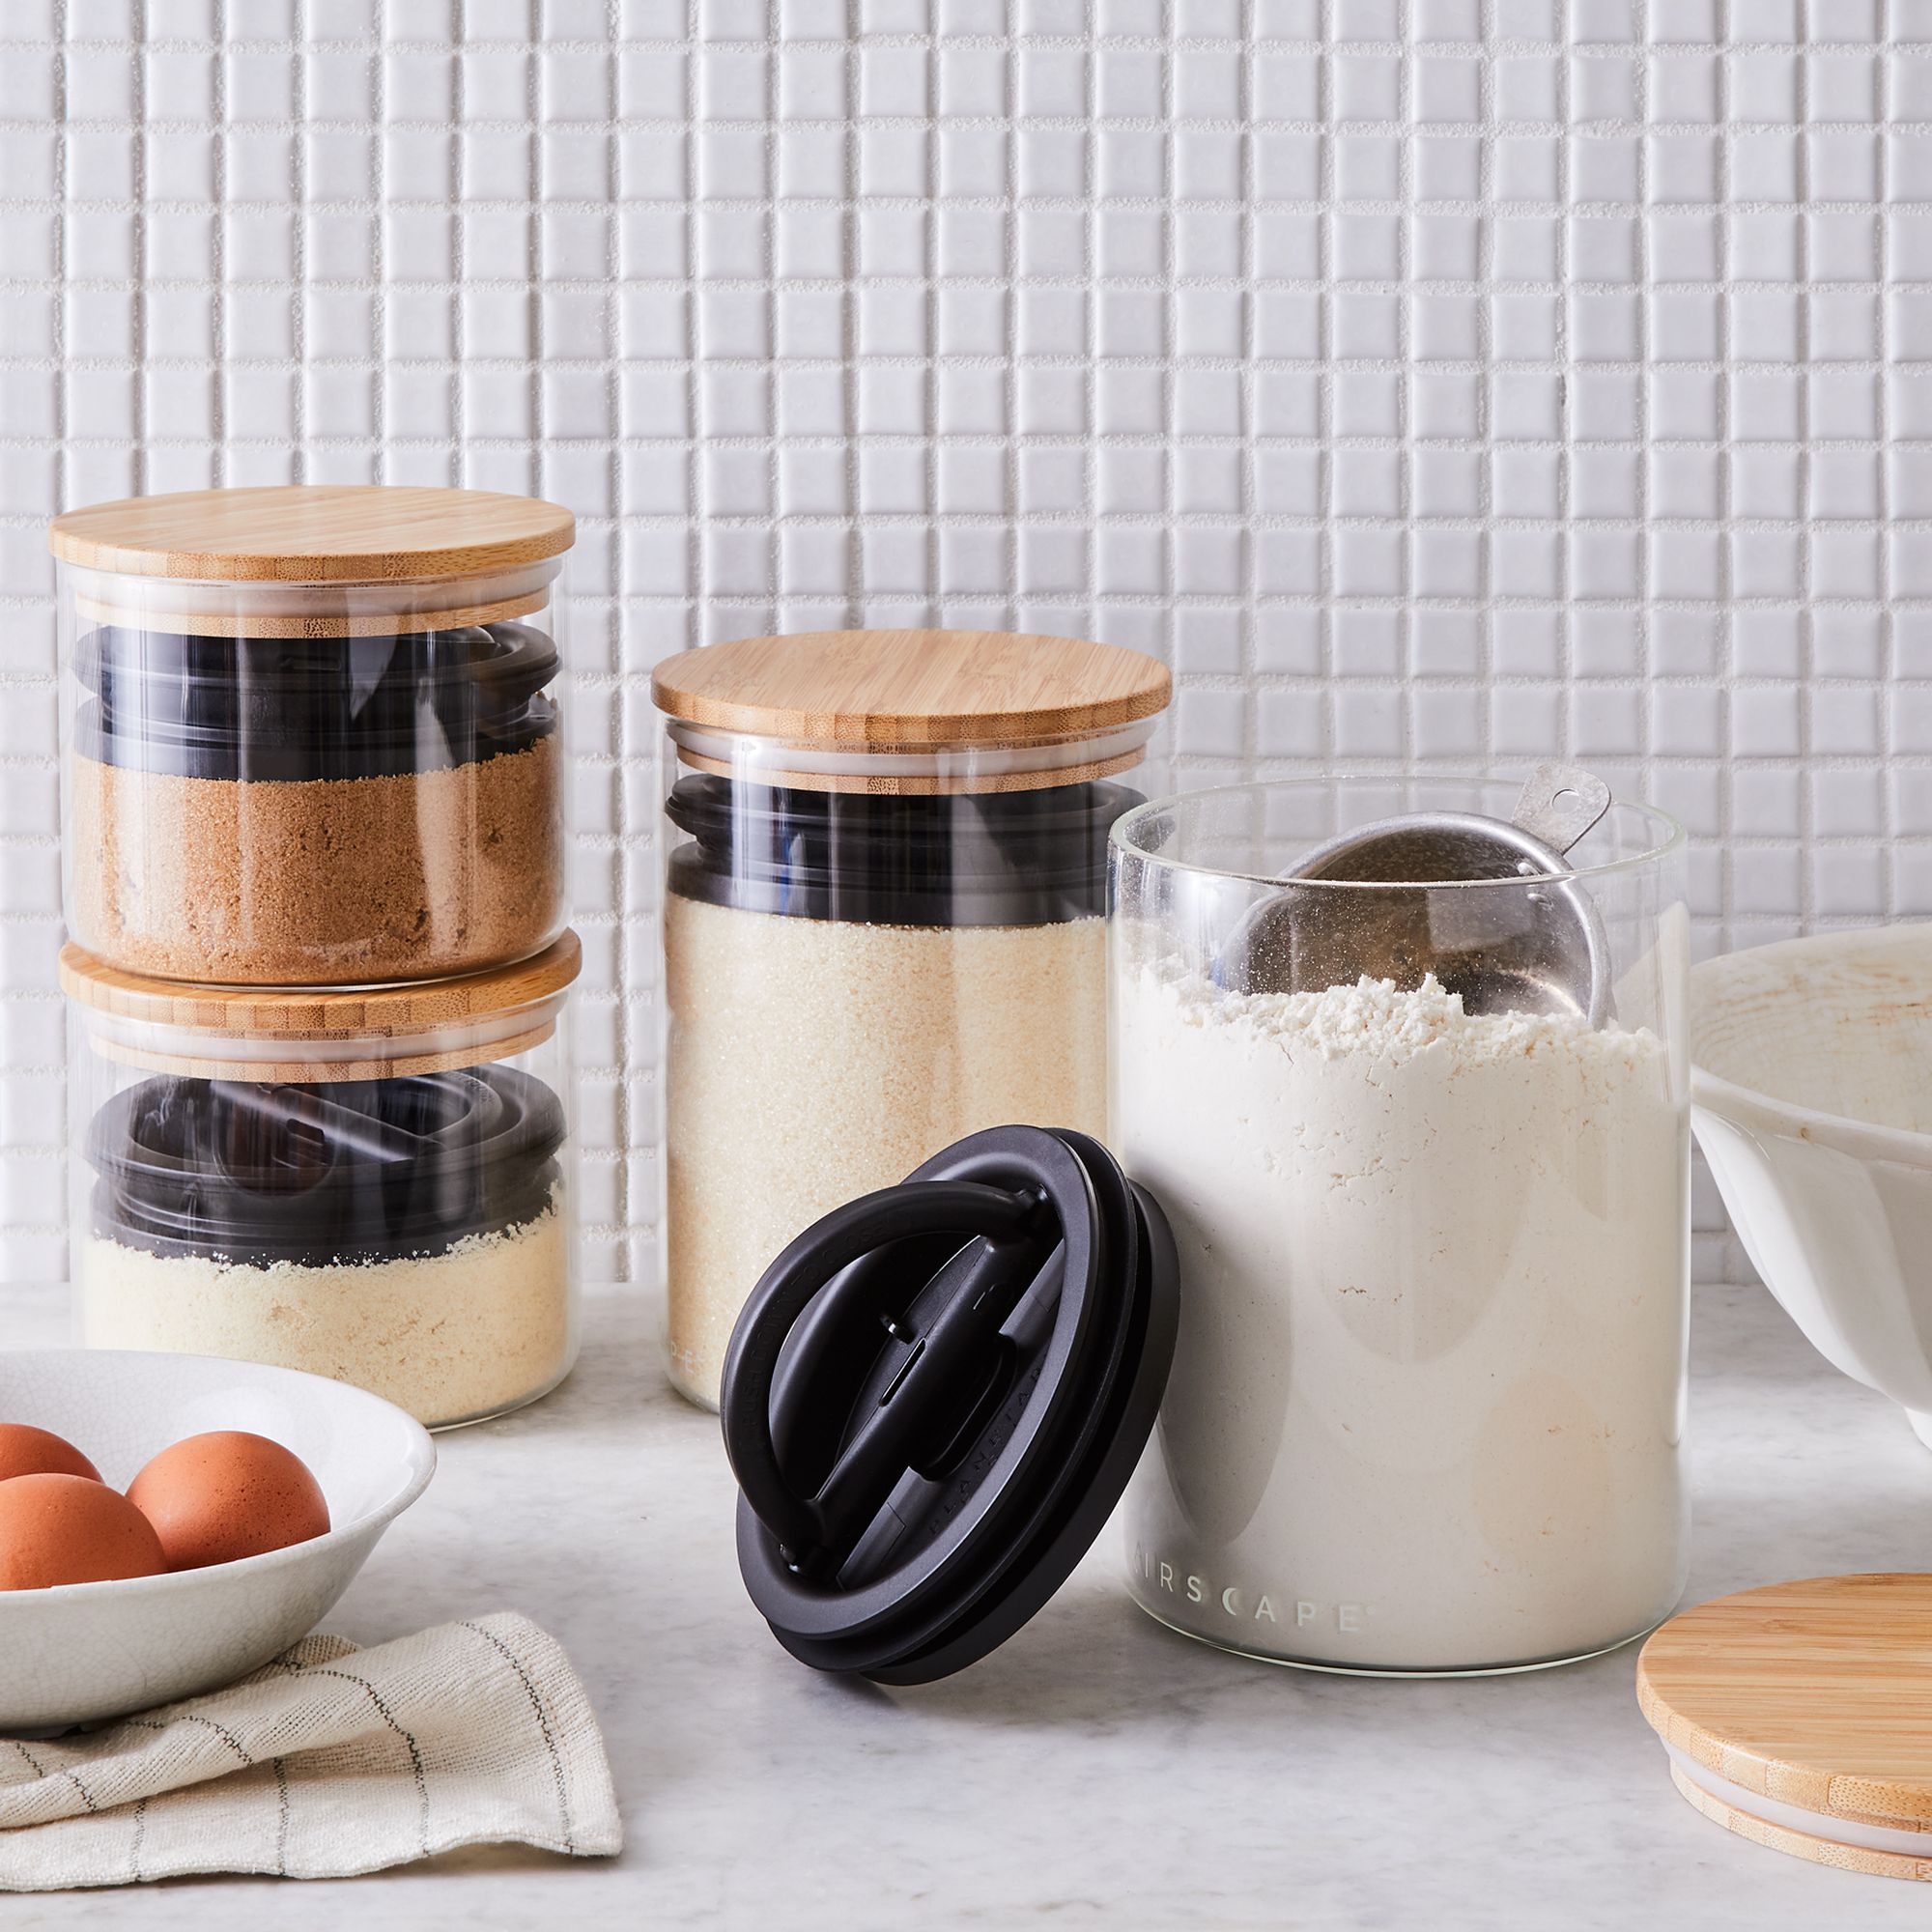 Top 9 benefits of glass food storage containers